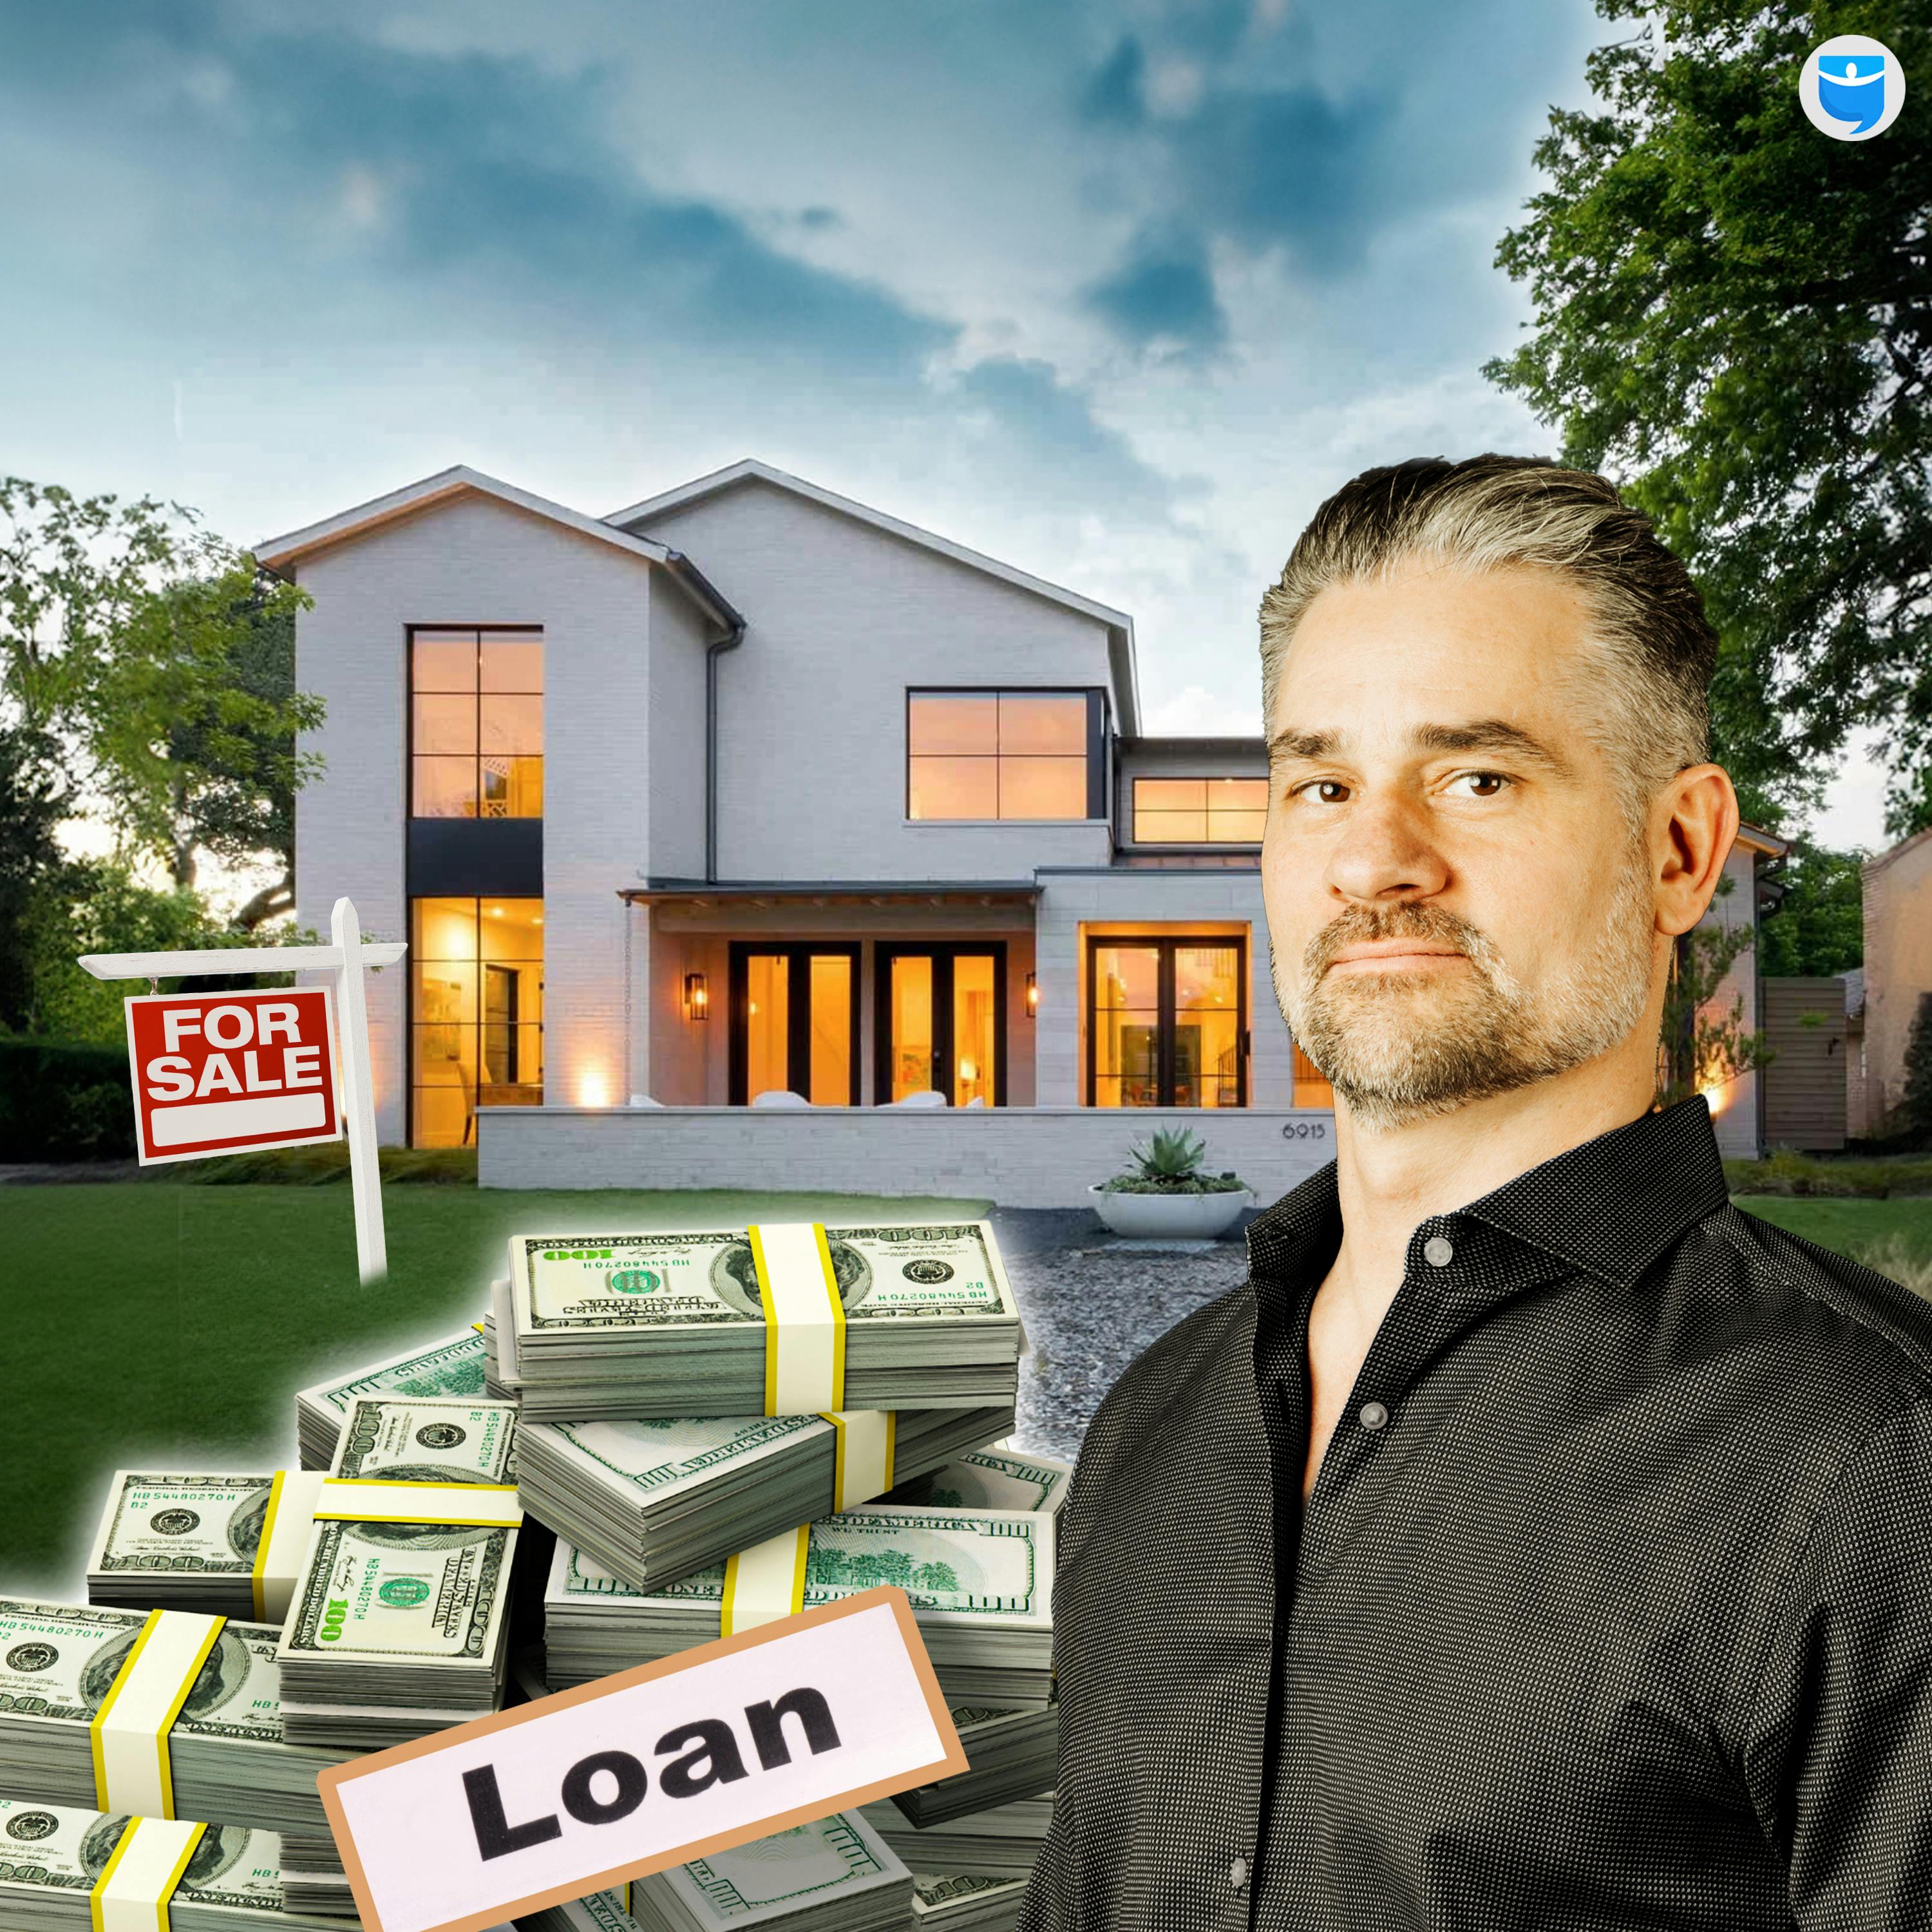 884: How to Use ”Hard Money” to Flip Houses, BRRRR, or Buy More Deals w/Will Heaton